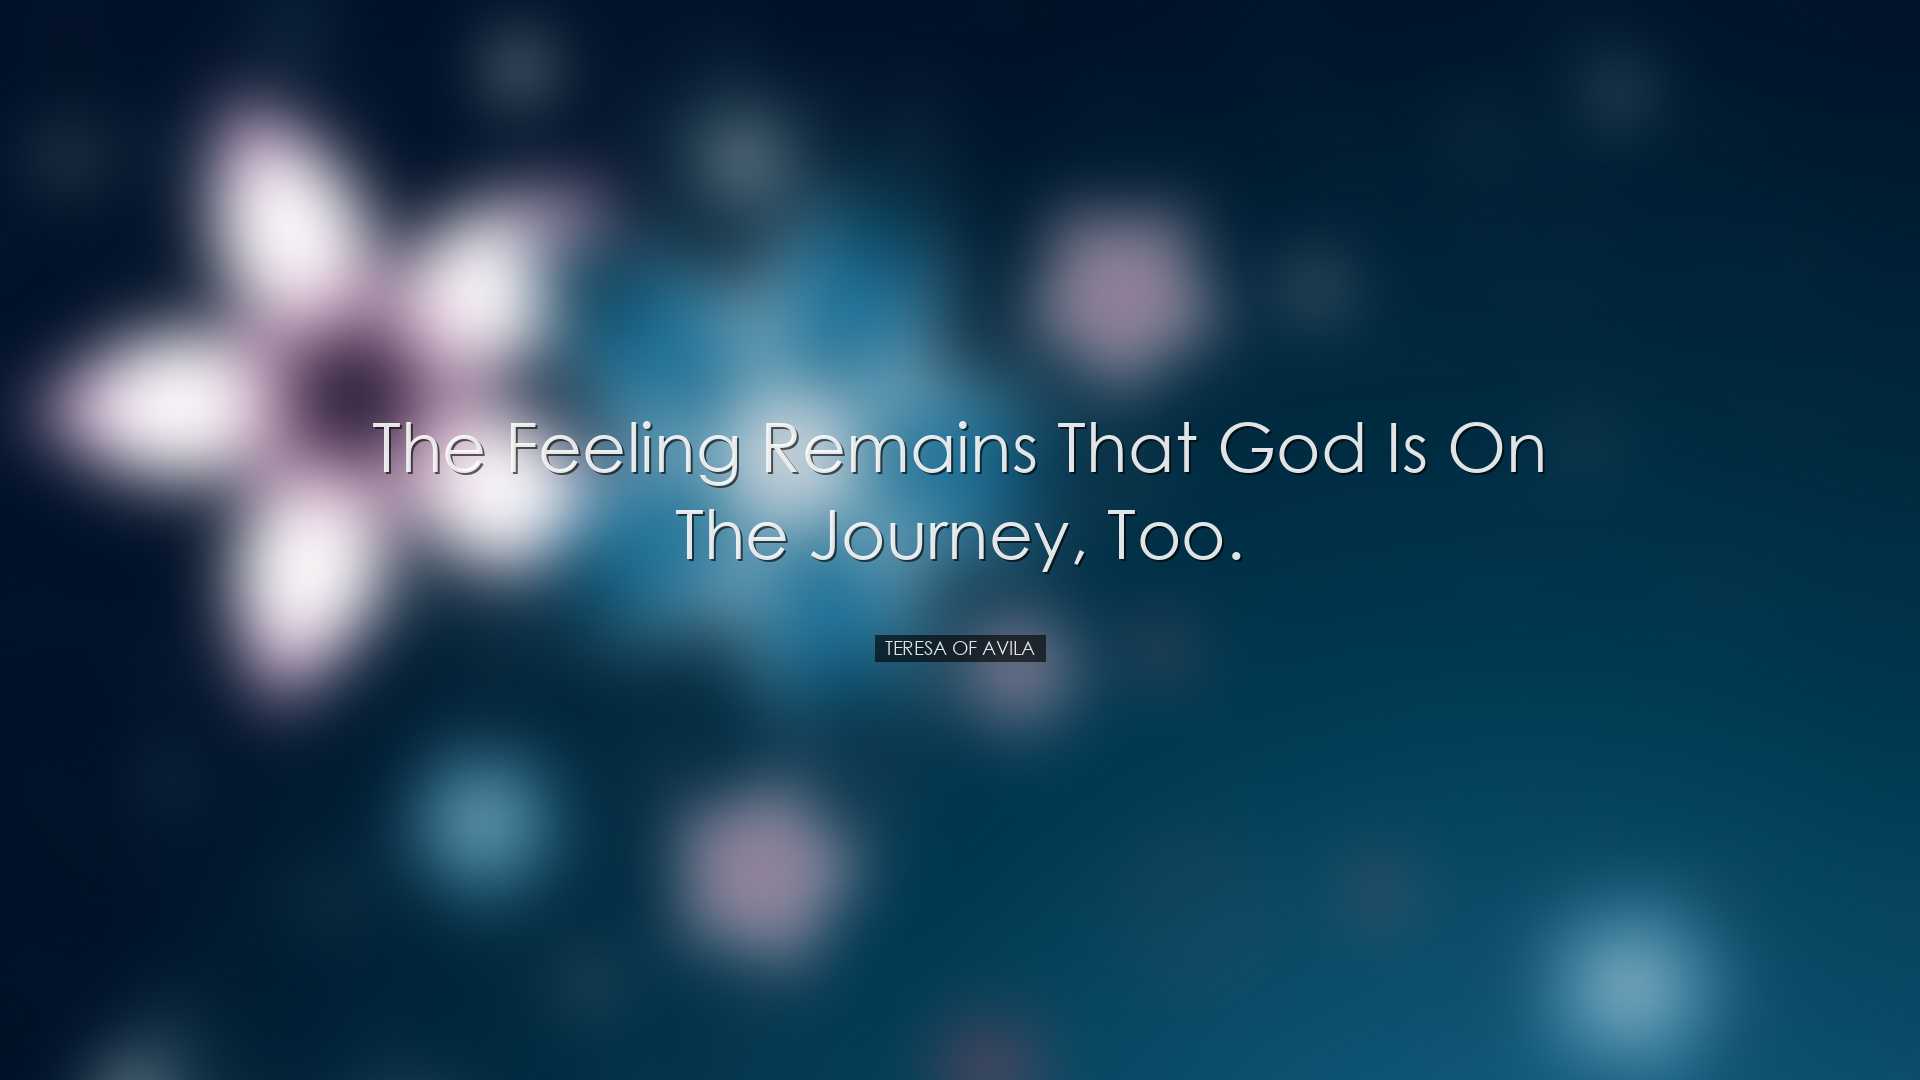 The feeling remains that God is on the journey, too. - Teresa of A